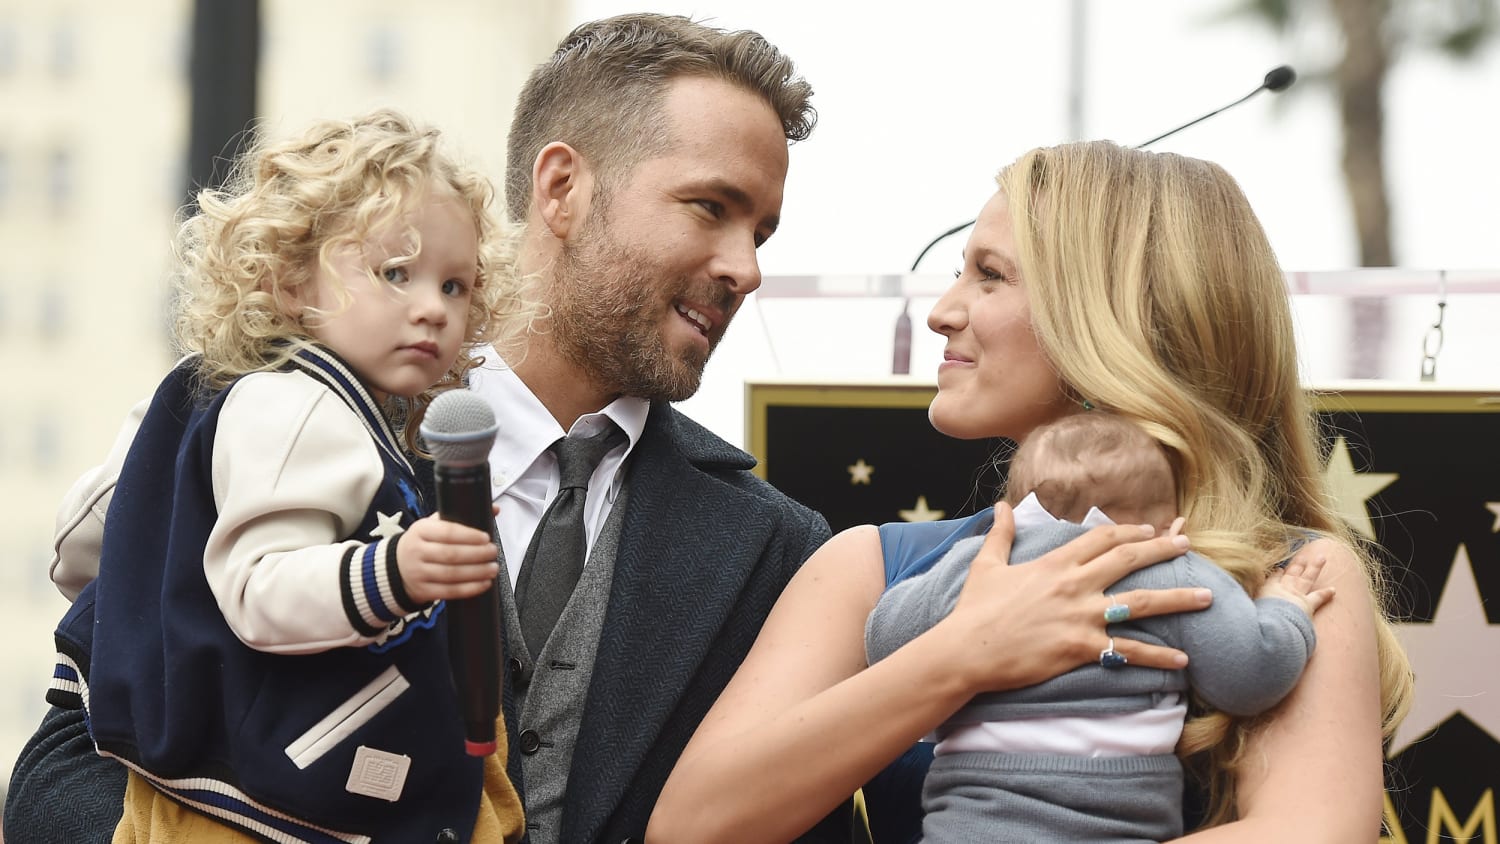 Ryan Reynolds opens up about anxiety, says Blake Lively keeps him 'sane' - TODAY.com